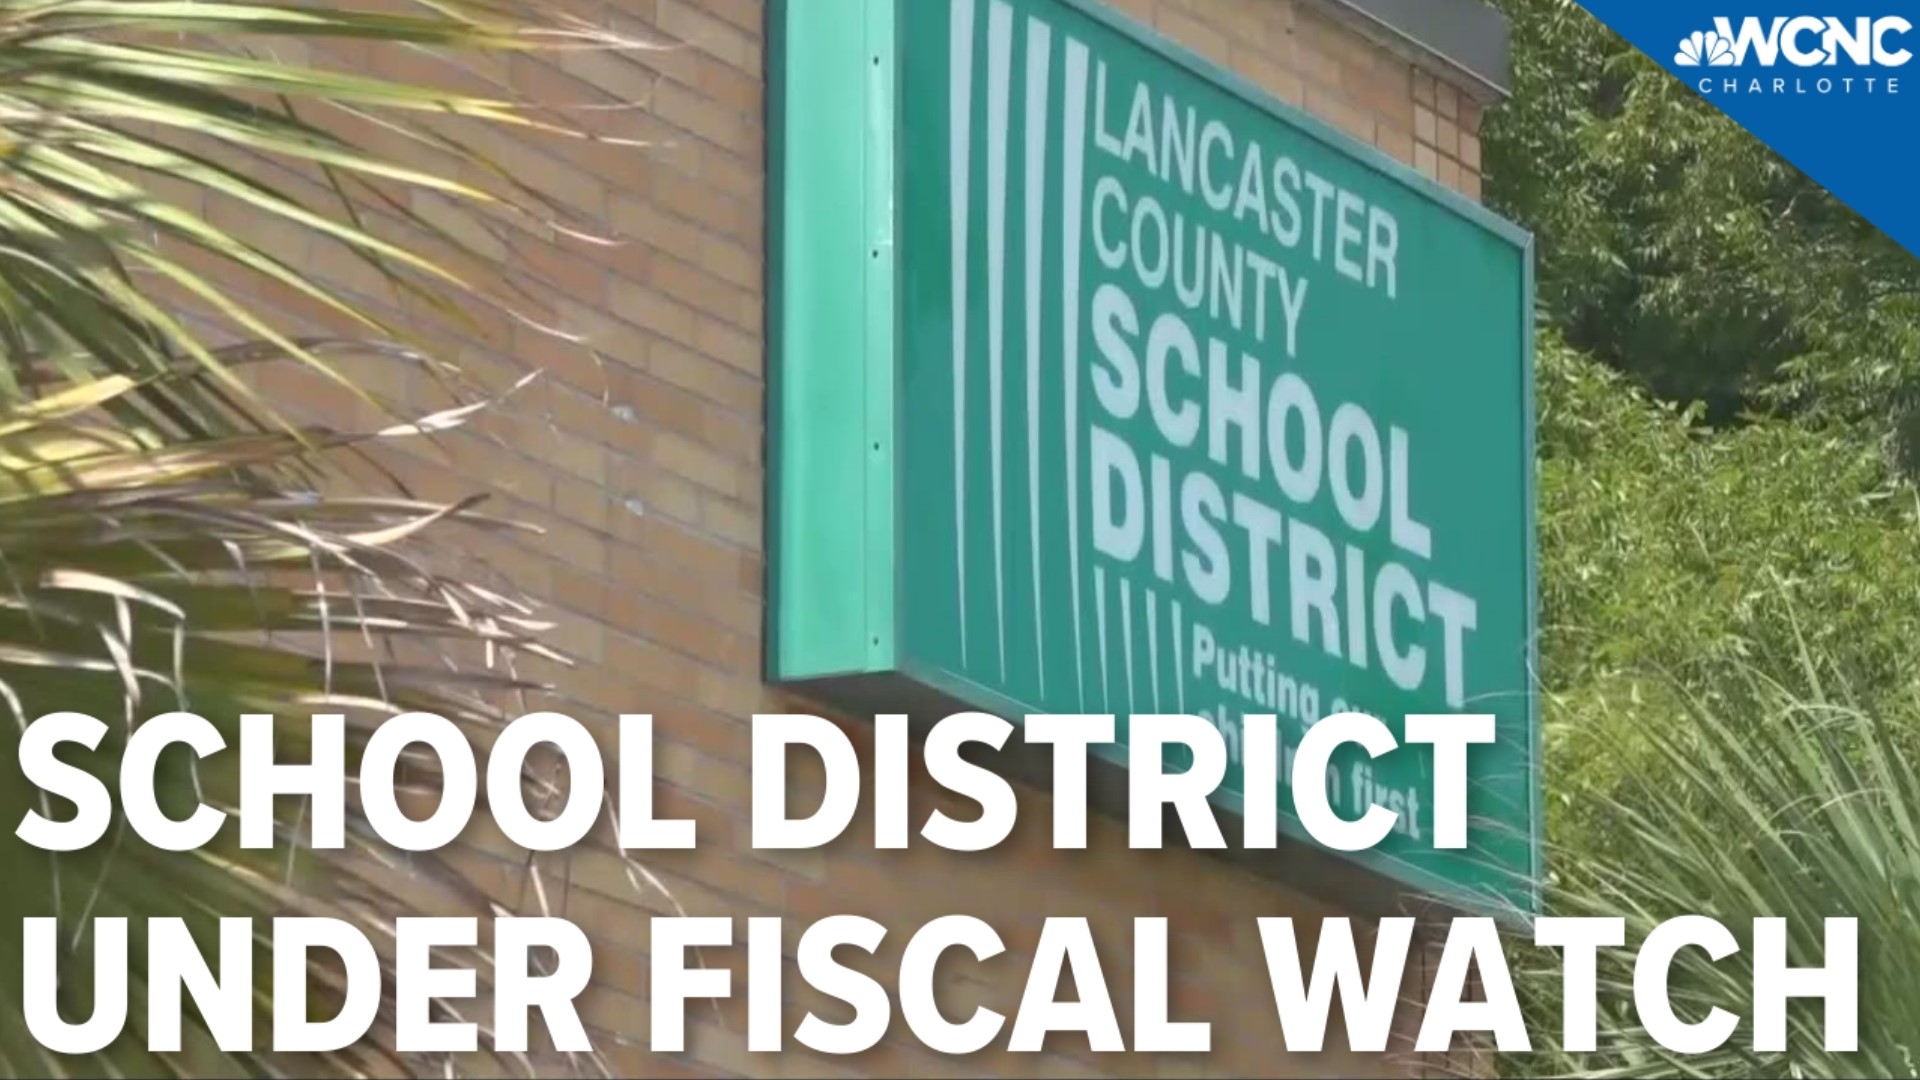 lancaster-county-school-district-remains-under-fiscal-watch-wcnc